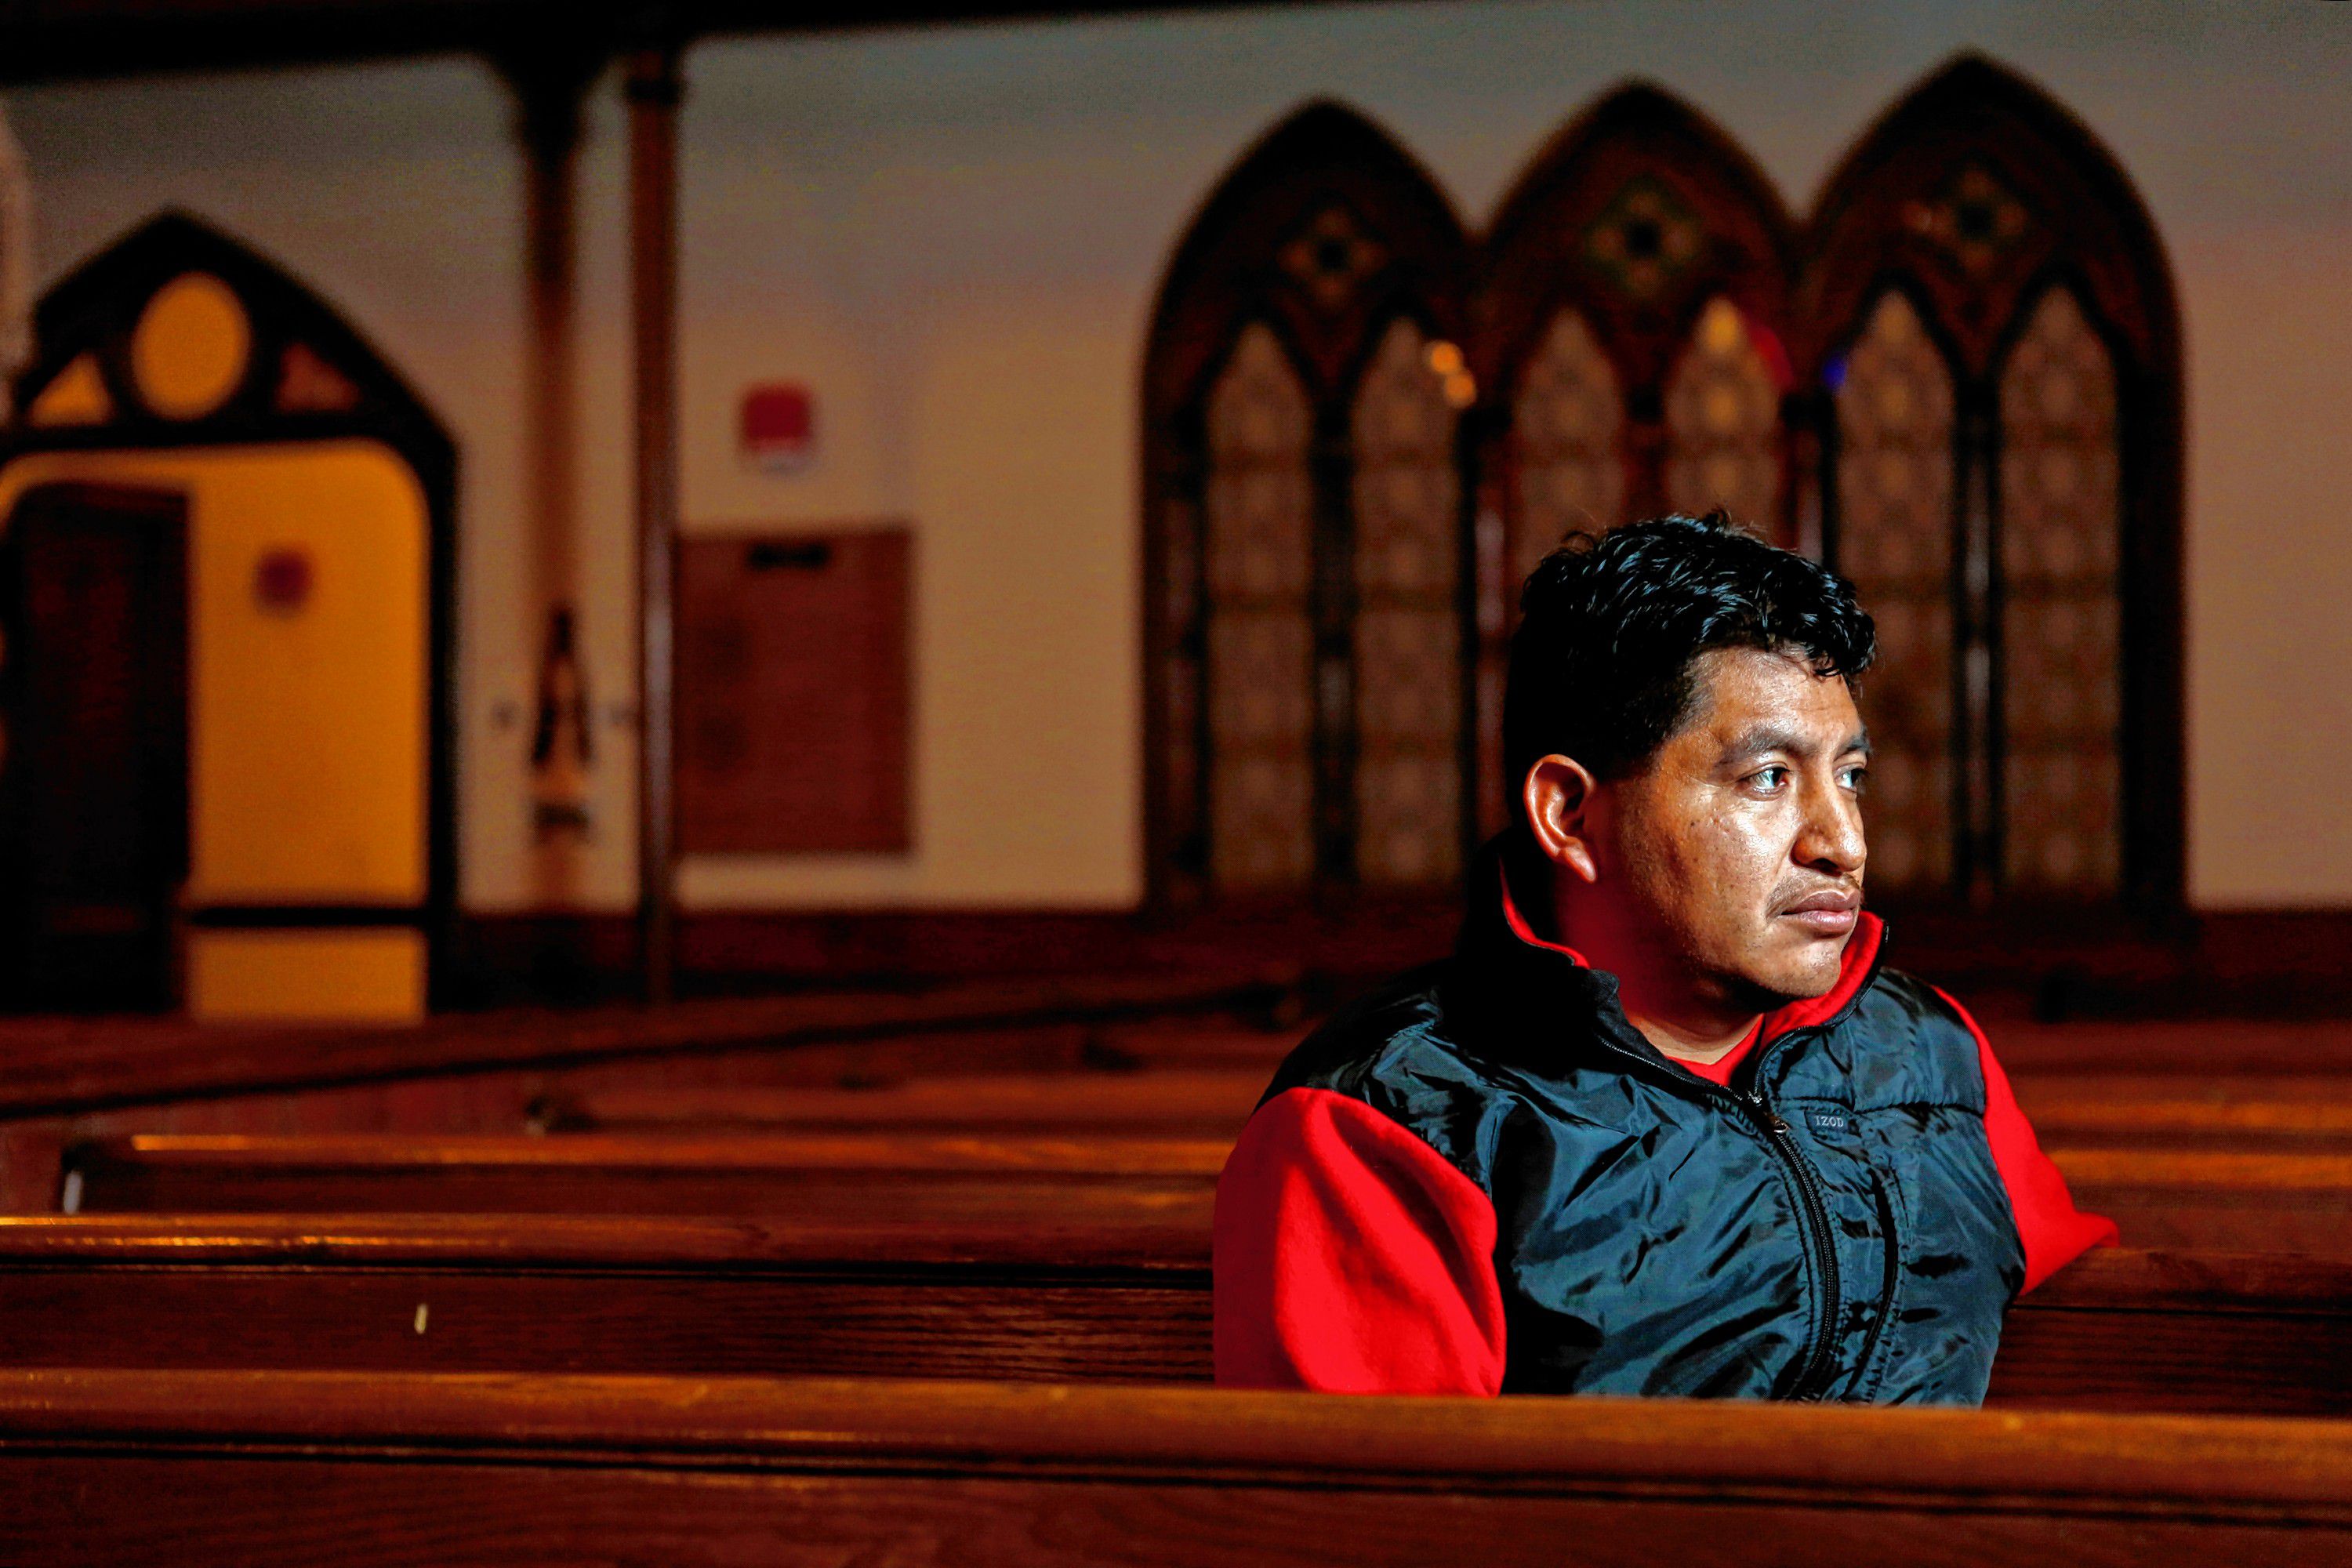 Immigrant taking sanctuary in Amherst church gets treated for ‘life-threatening’ condition at Cooley Dickinson in Northampton